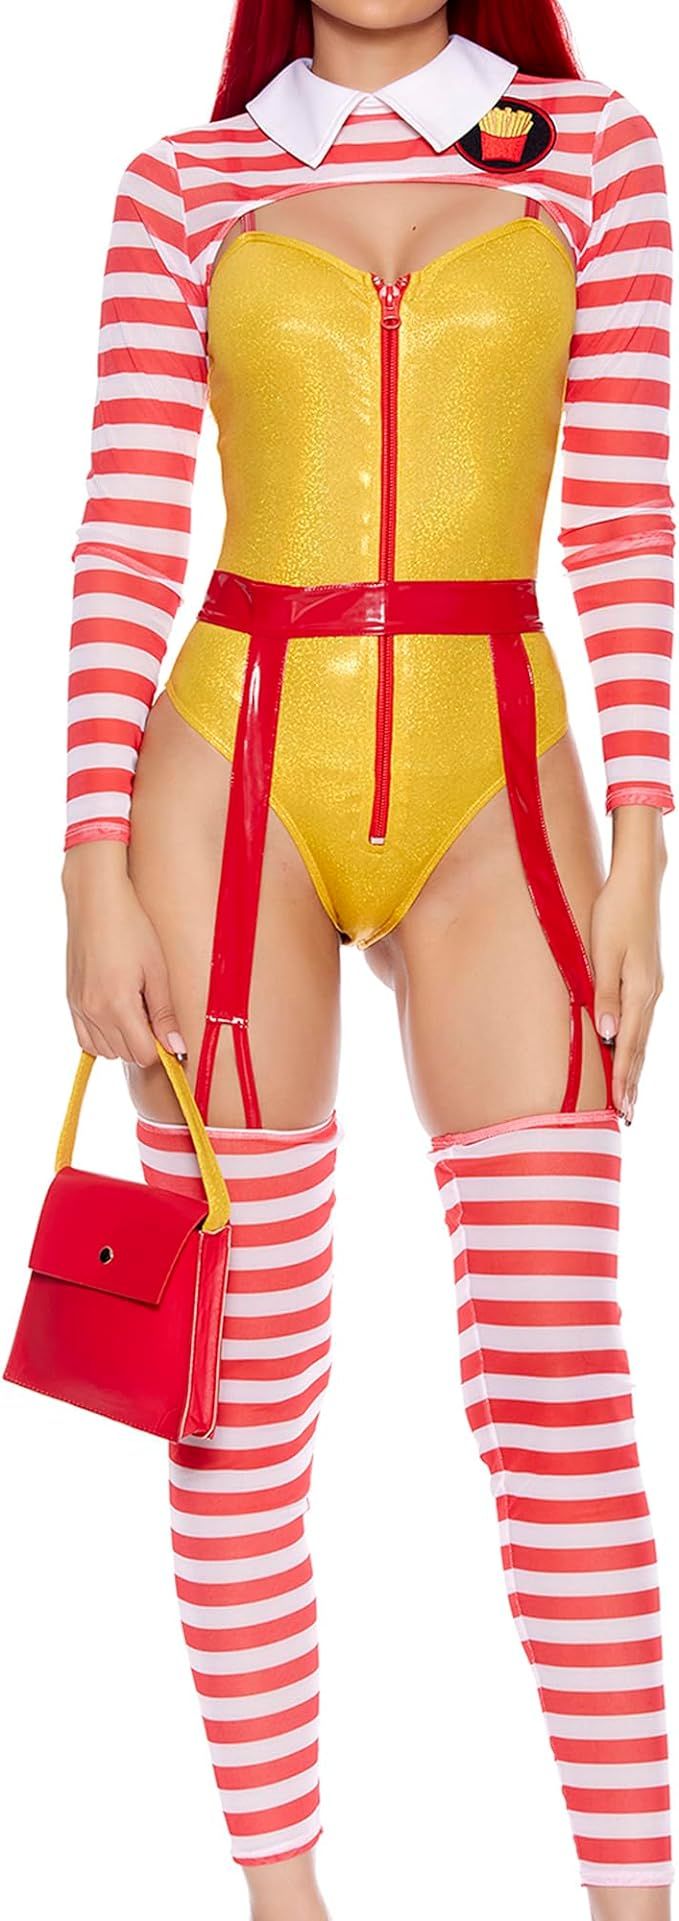 Forplay Women's Size Me Up Sexy Fast Food Costume, Multicolor | Amazon (US)